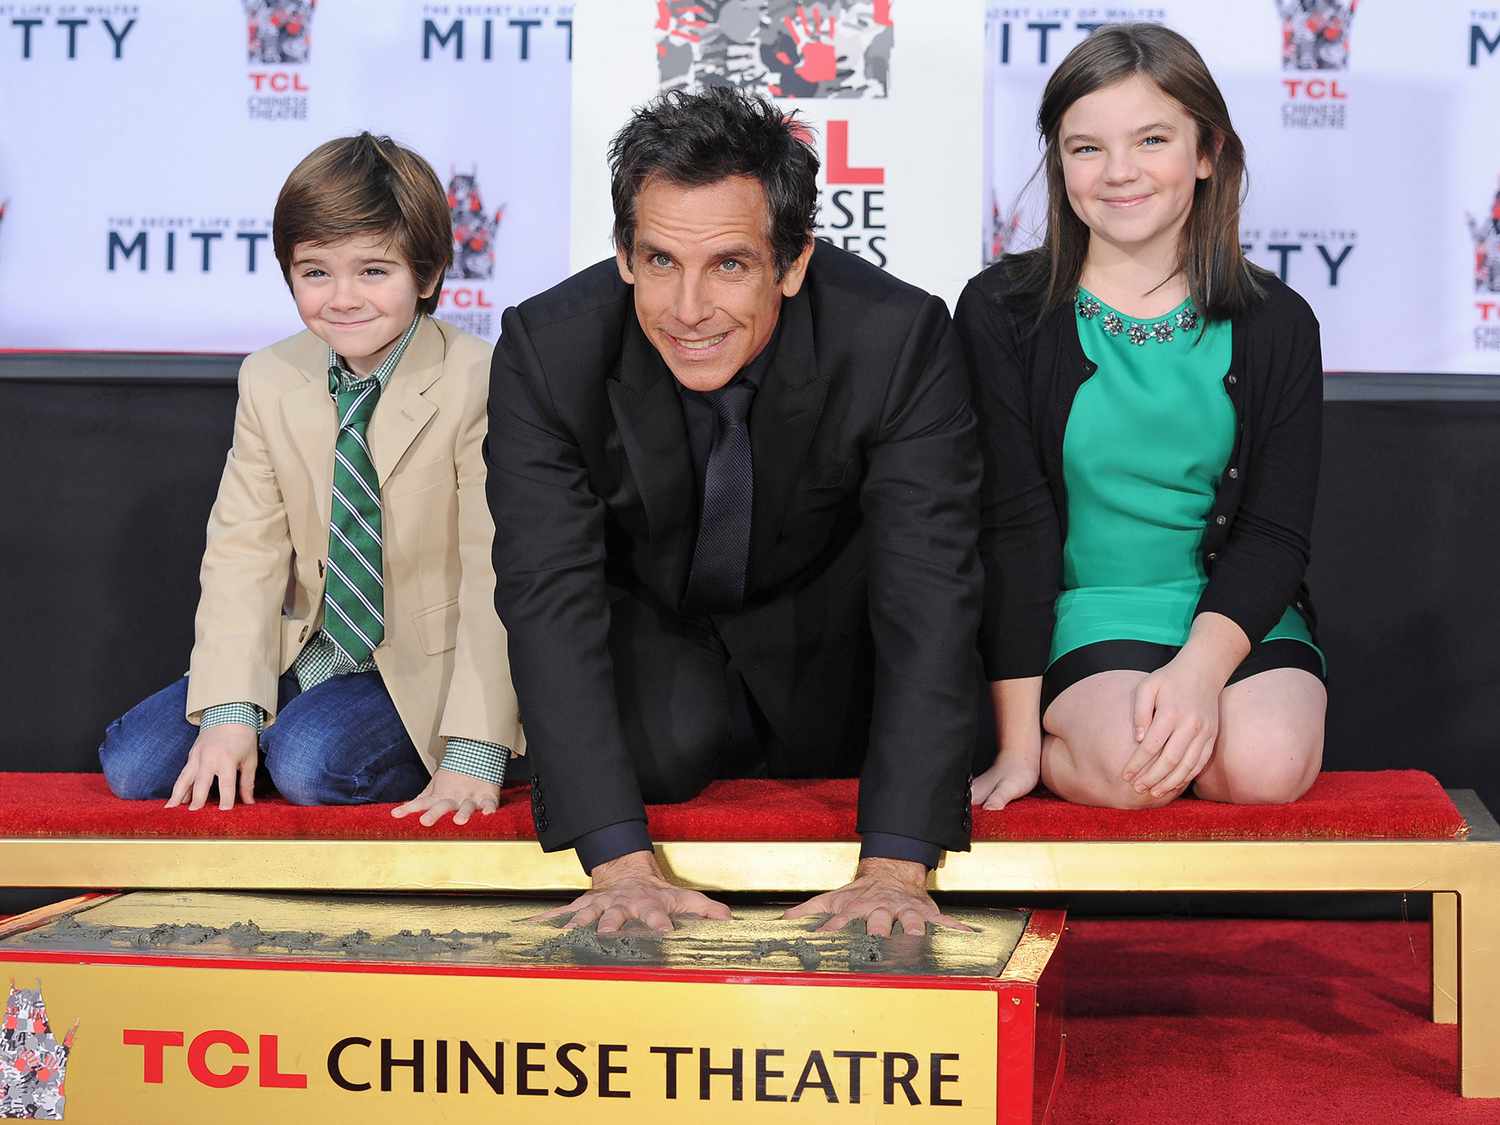 Ben Stiller (C) and his children Quinlin Stiller (L) and Ella Stiller attend the hand and footprint ceremony honoring Ben Stiller held at TCL Chinese Theatre on December 3, 2013 in Hollywood, California